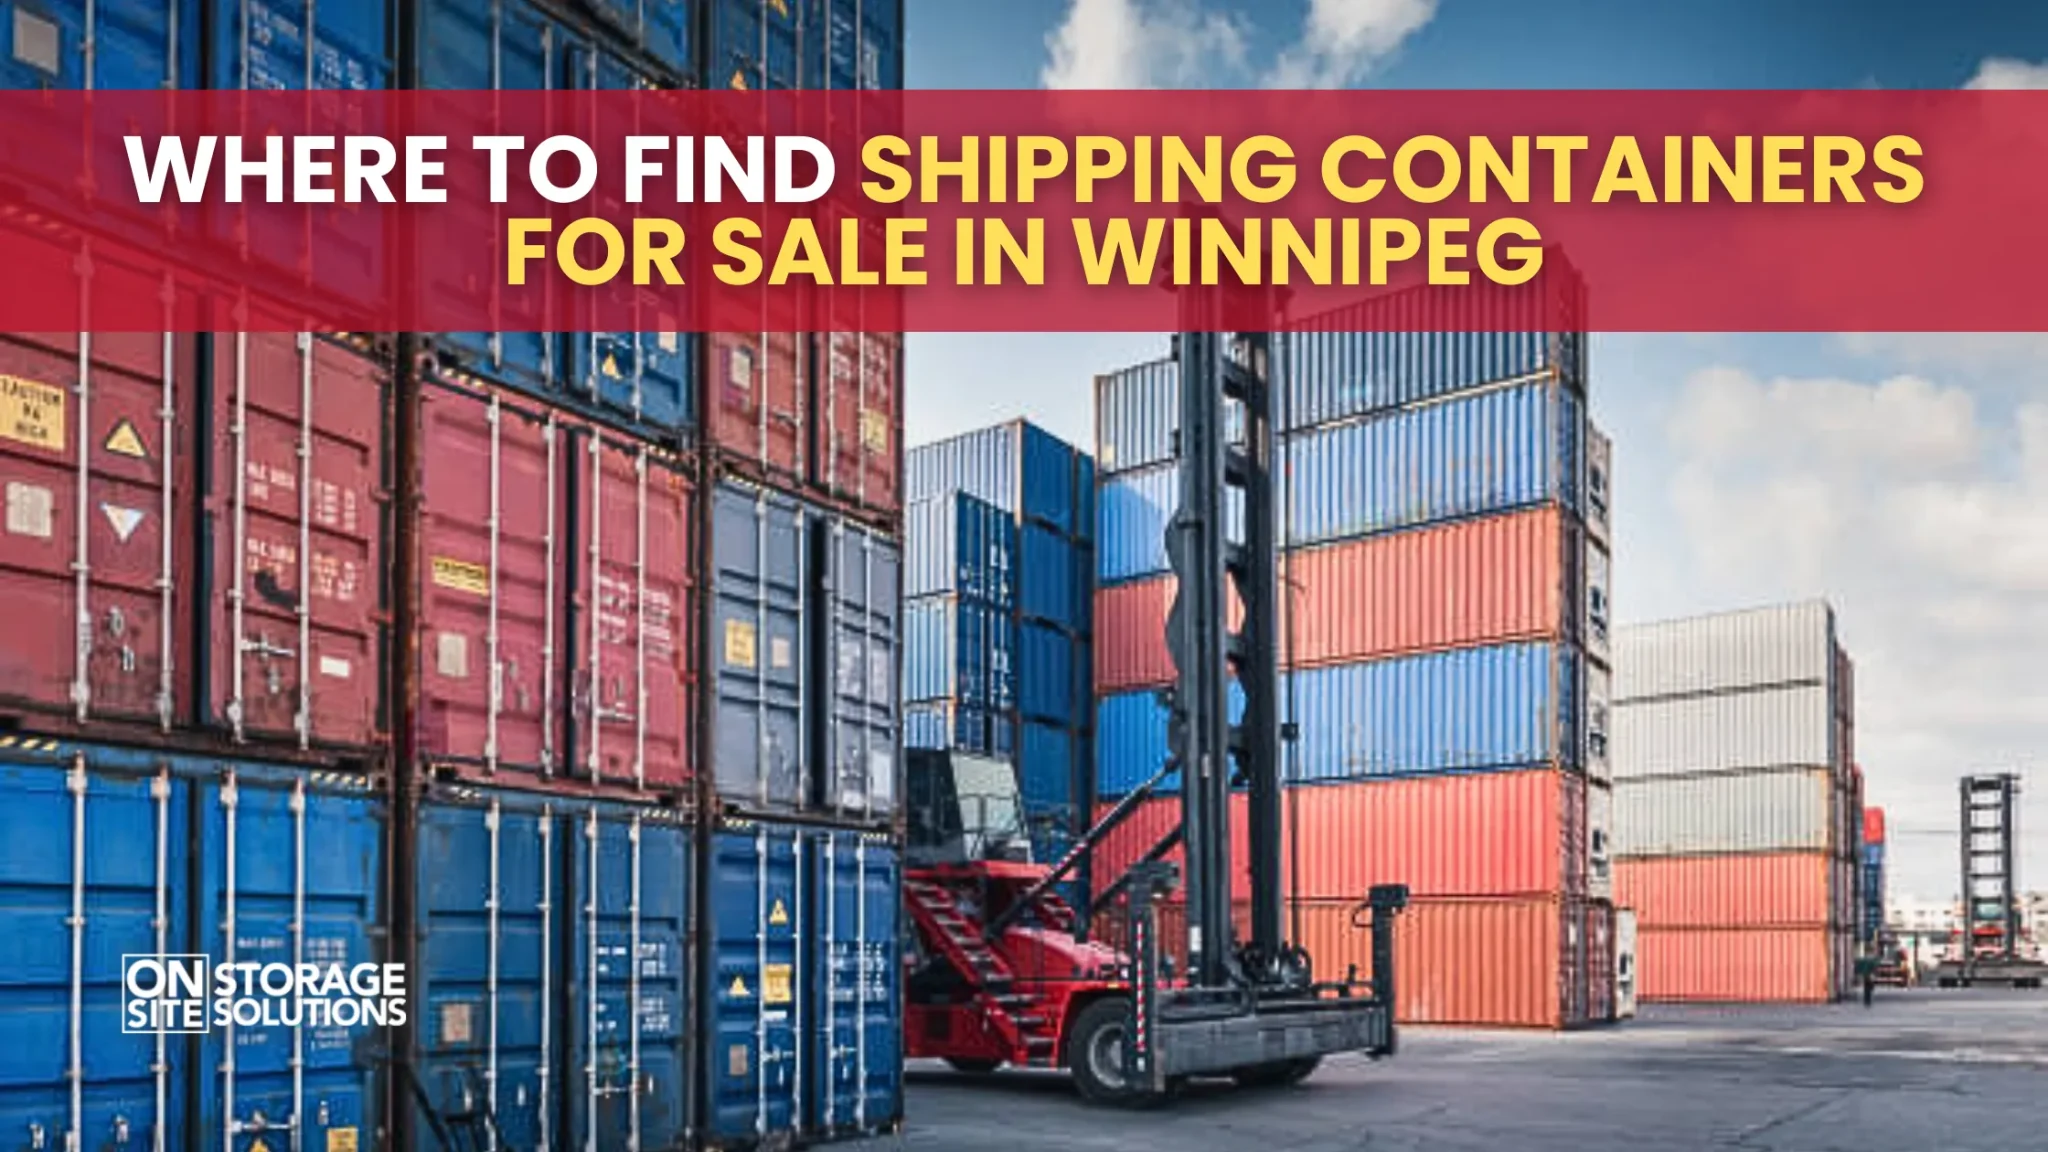 Where to Find Shipping Containers for Sale in Winnipeg